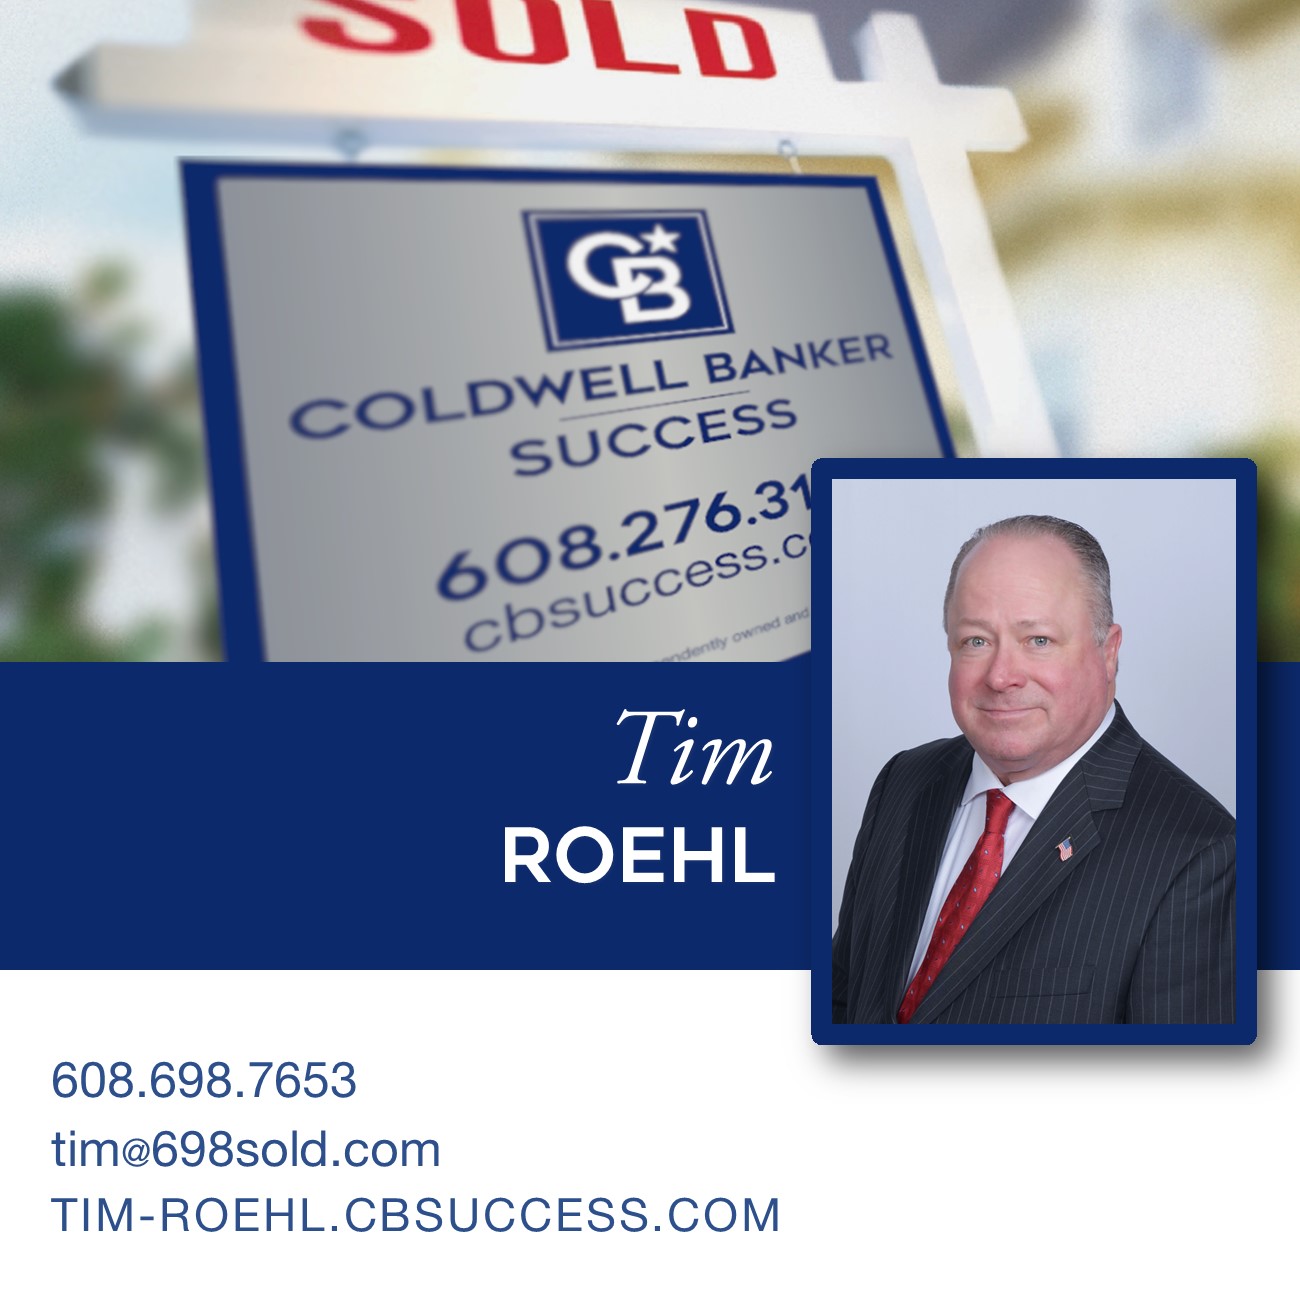 Tim Roehl Provided Great Service